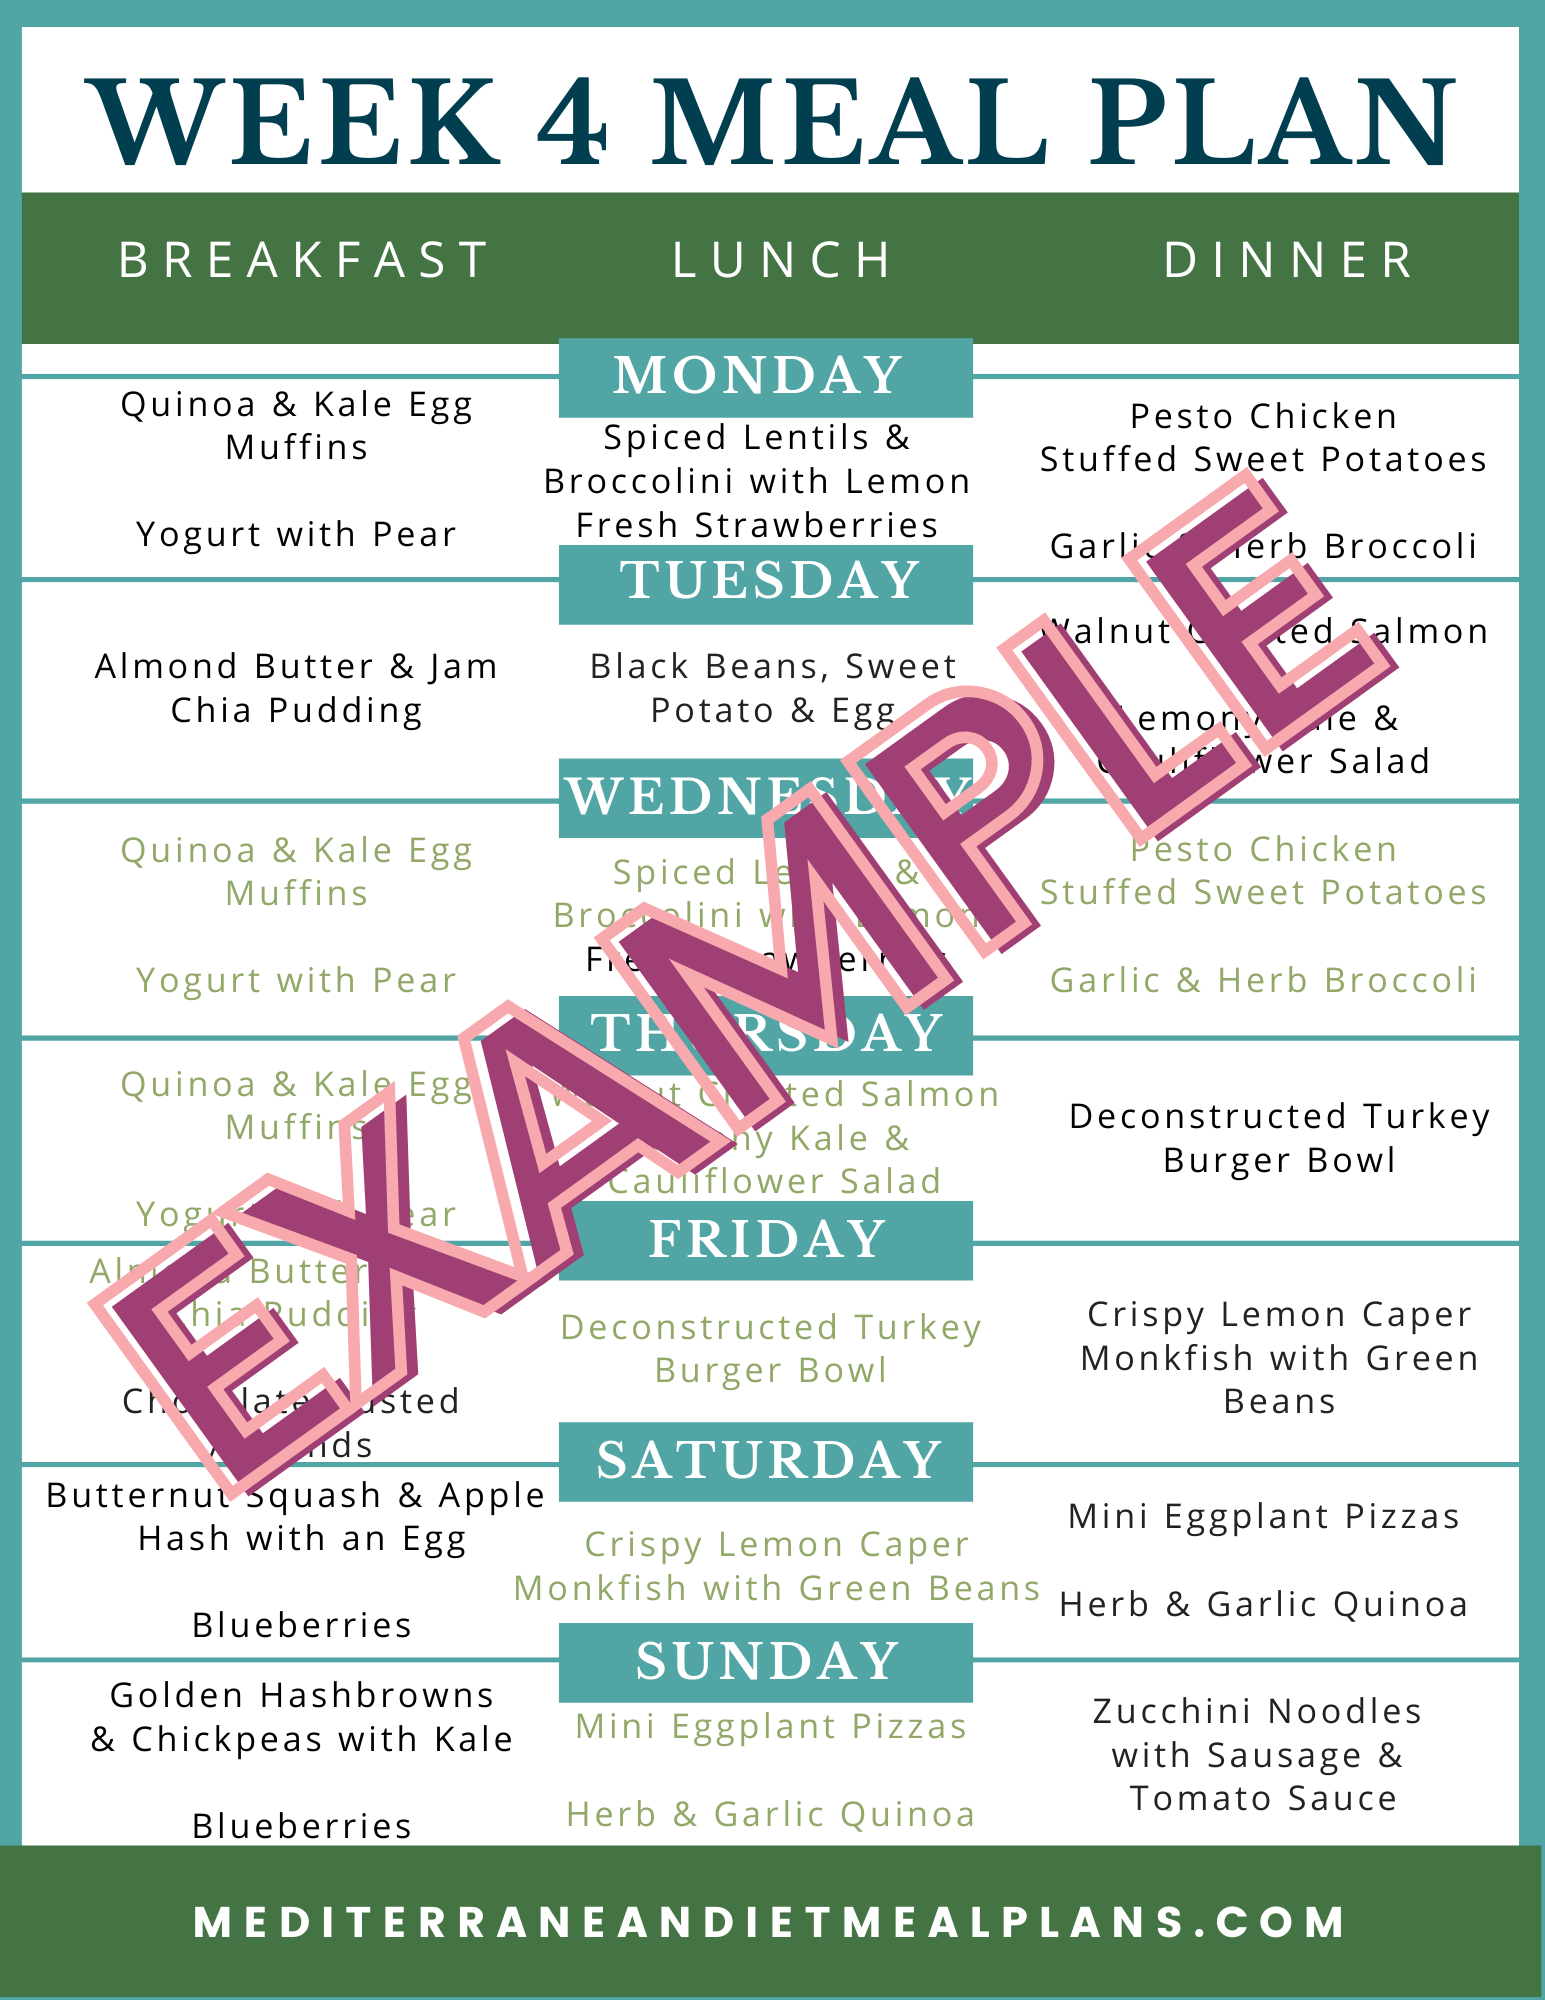 Single 30 Day Meal Plan